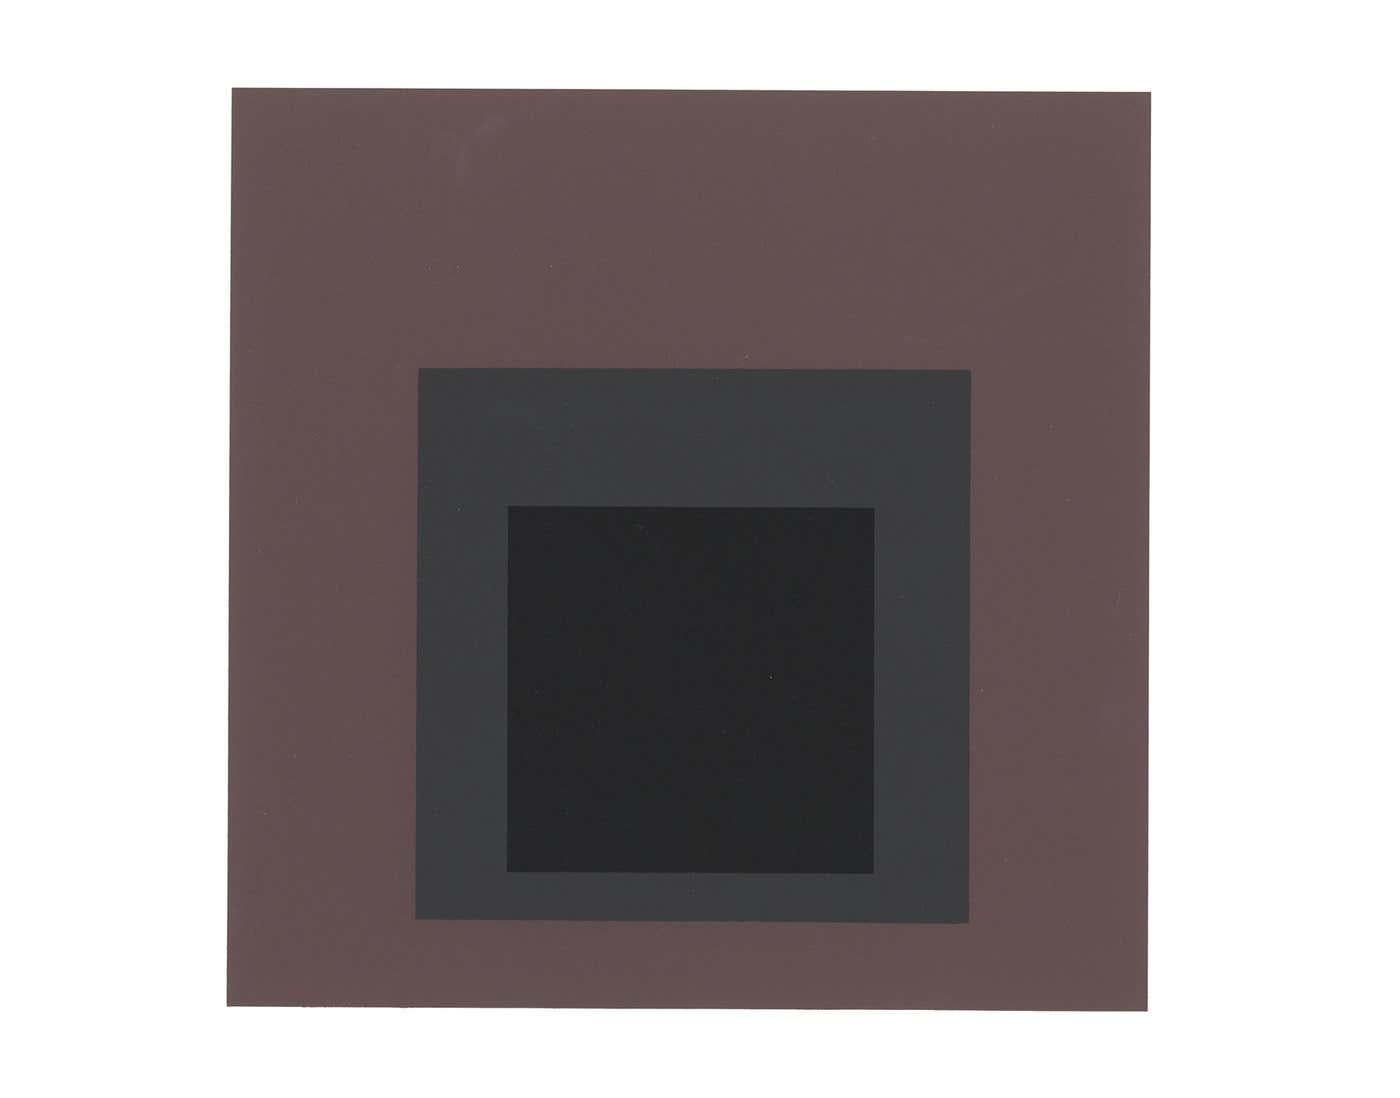 Josef Albers Homage to the Square 1964 (set of 4 printed works)  - Print by (after) Josef Albers